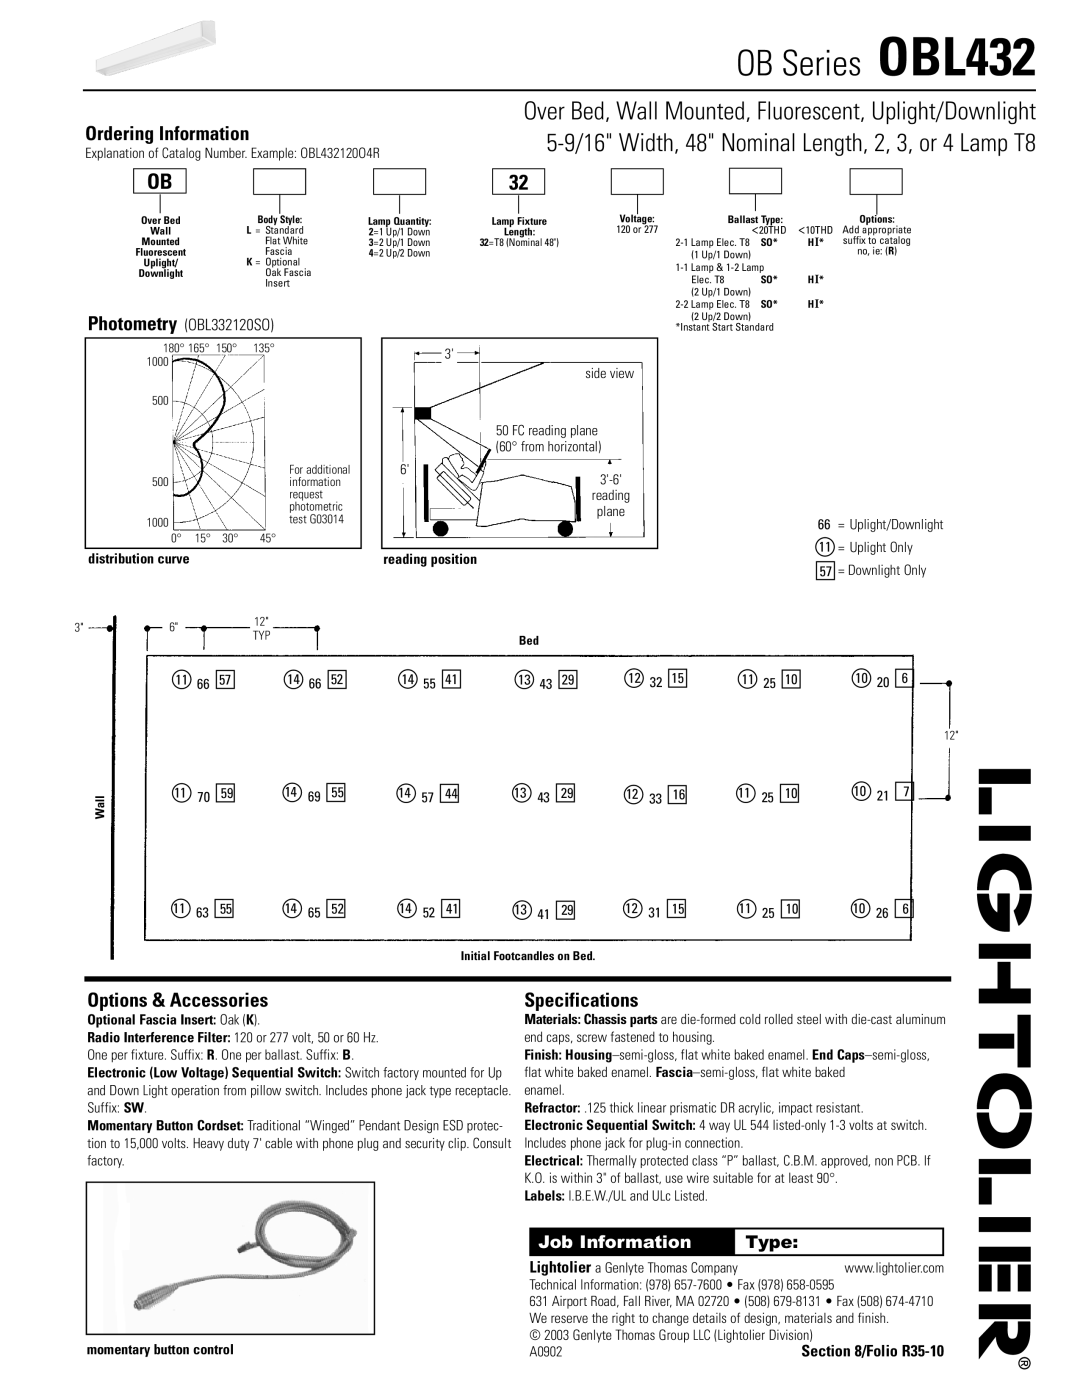 Lightolier Ordering Information, Options & Accessories, Specifications, OB Series OBL432, , Job Information, Type 